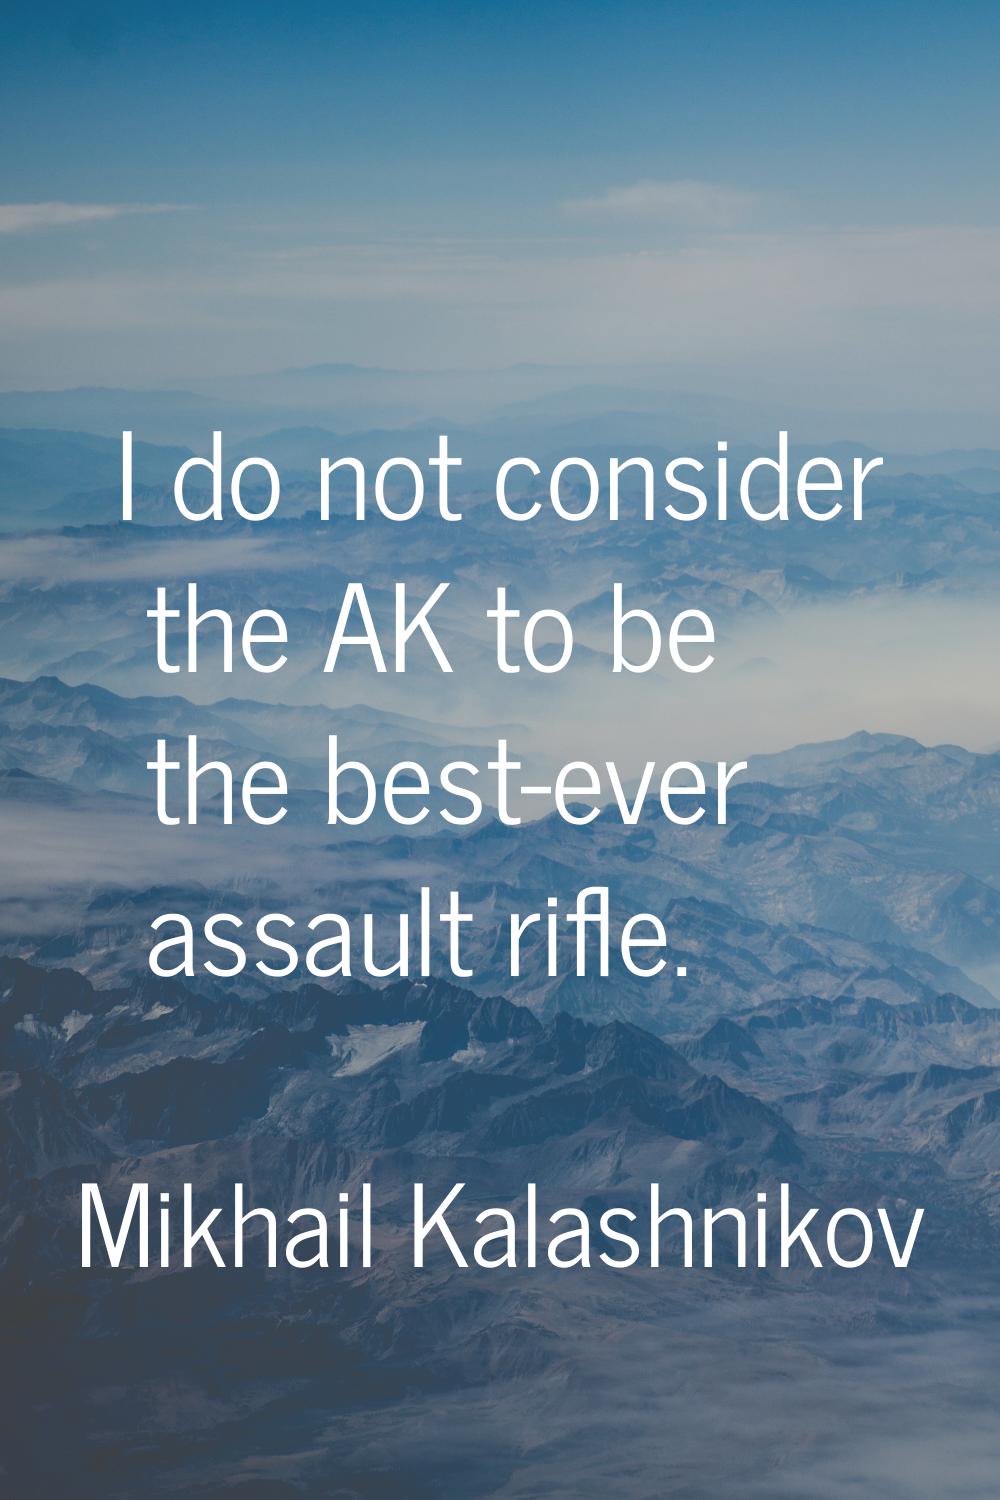 I do not consider the AK to be the best-ever assault rifle.